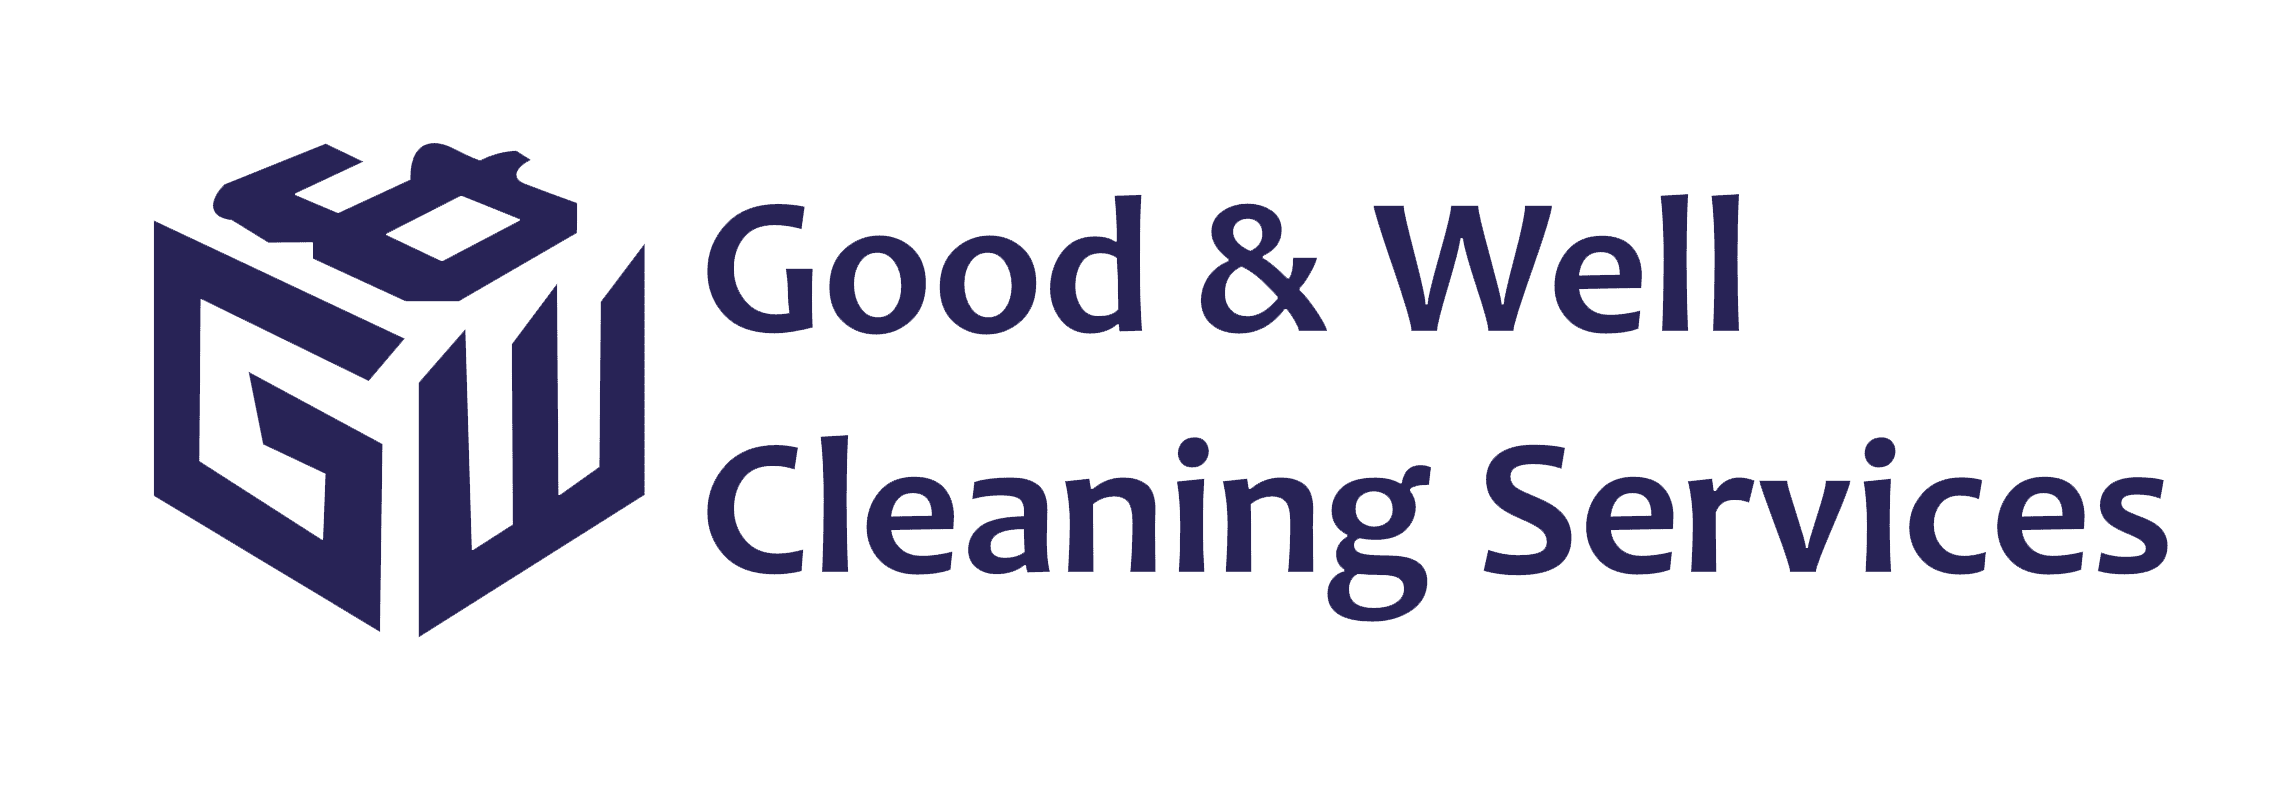 Good And Well Cleaning Services LLC